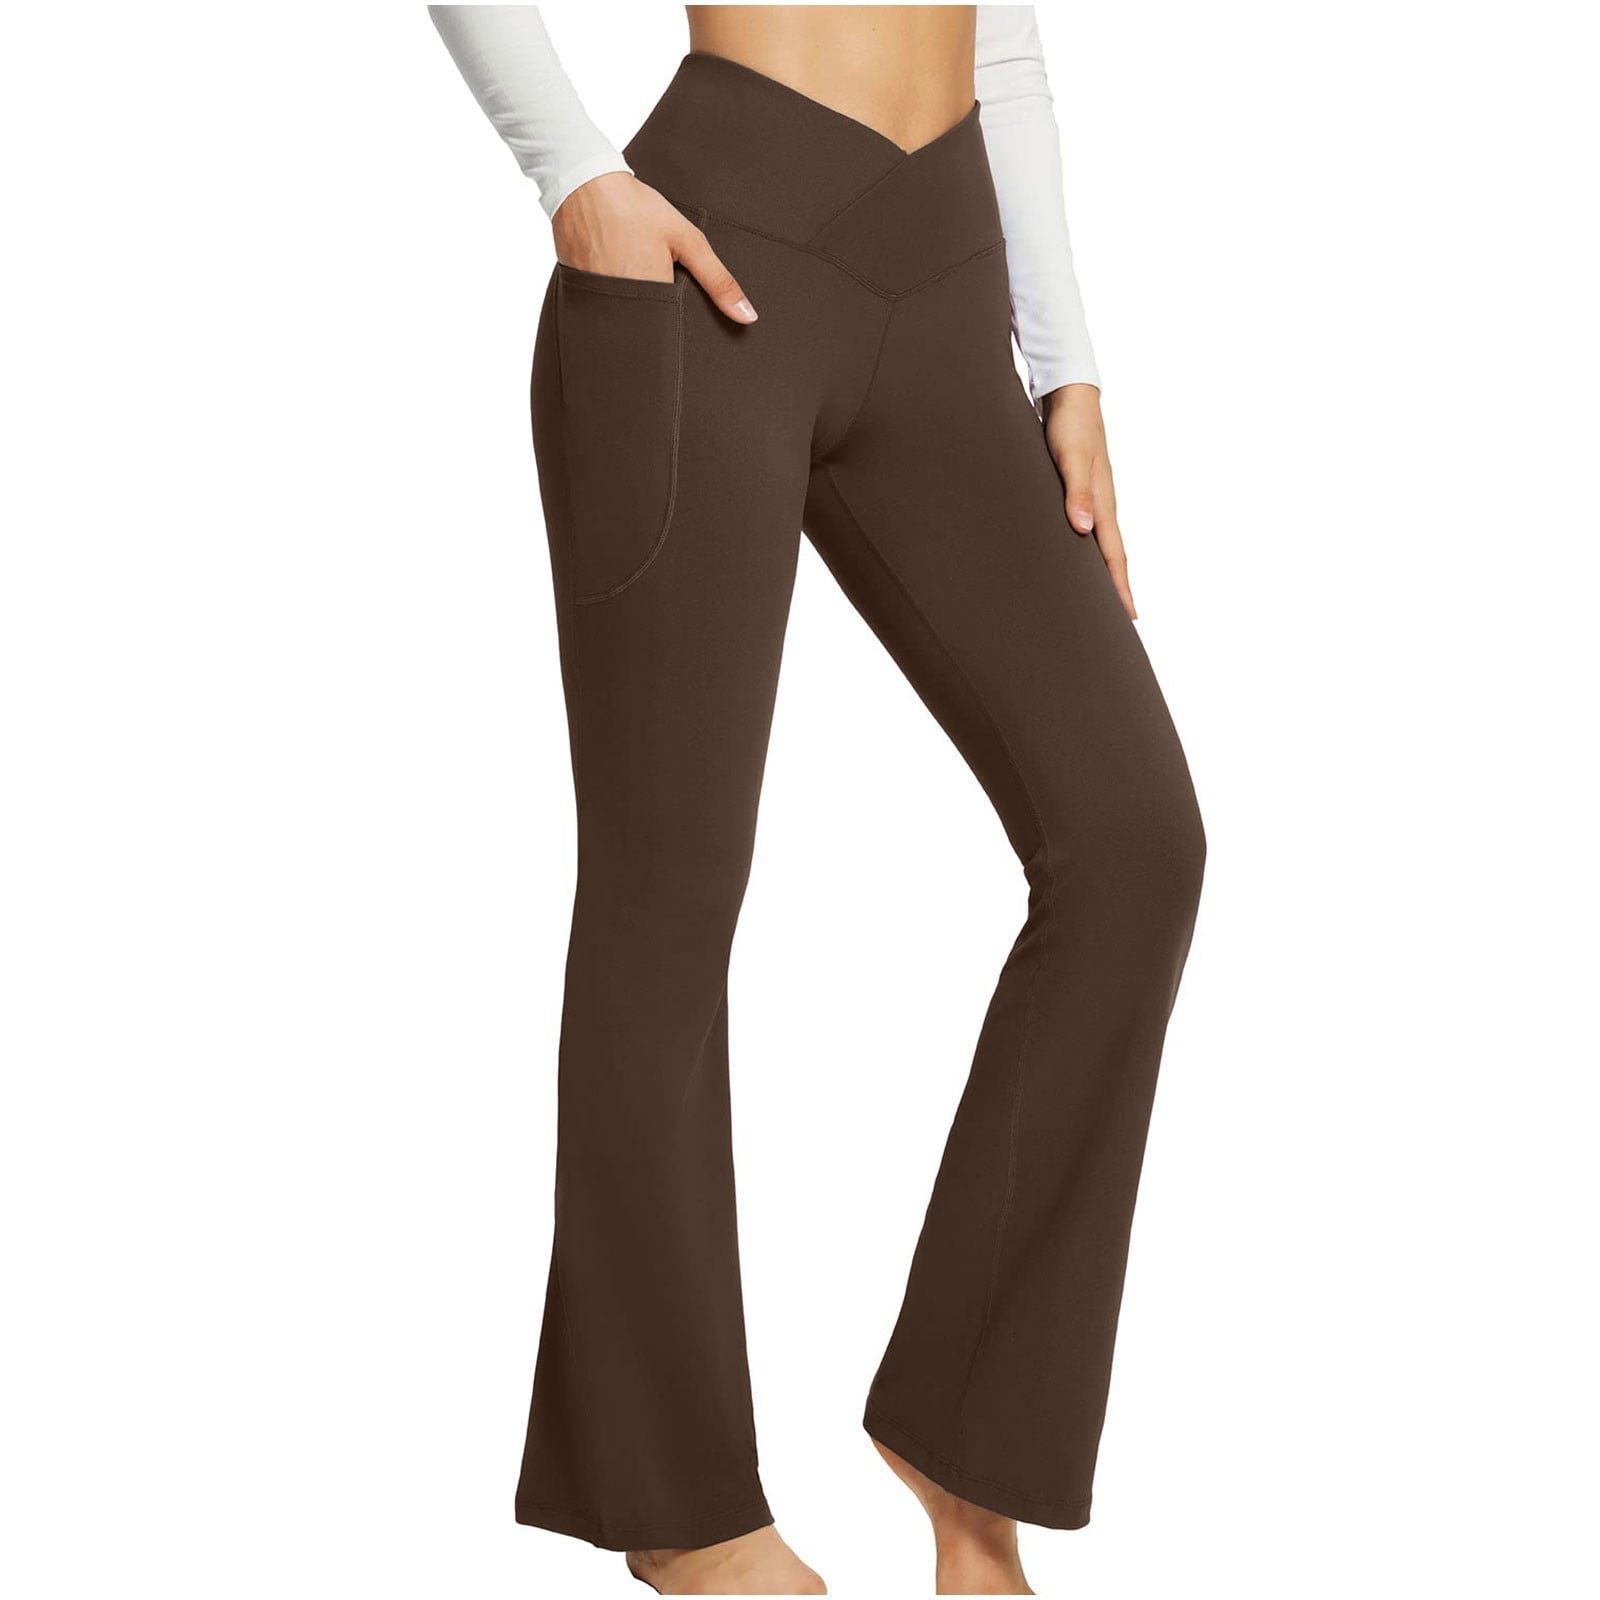 Big Deals! Flare Leggings, Yoga Pants with Pockets for Women, High